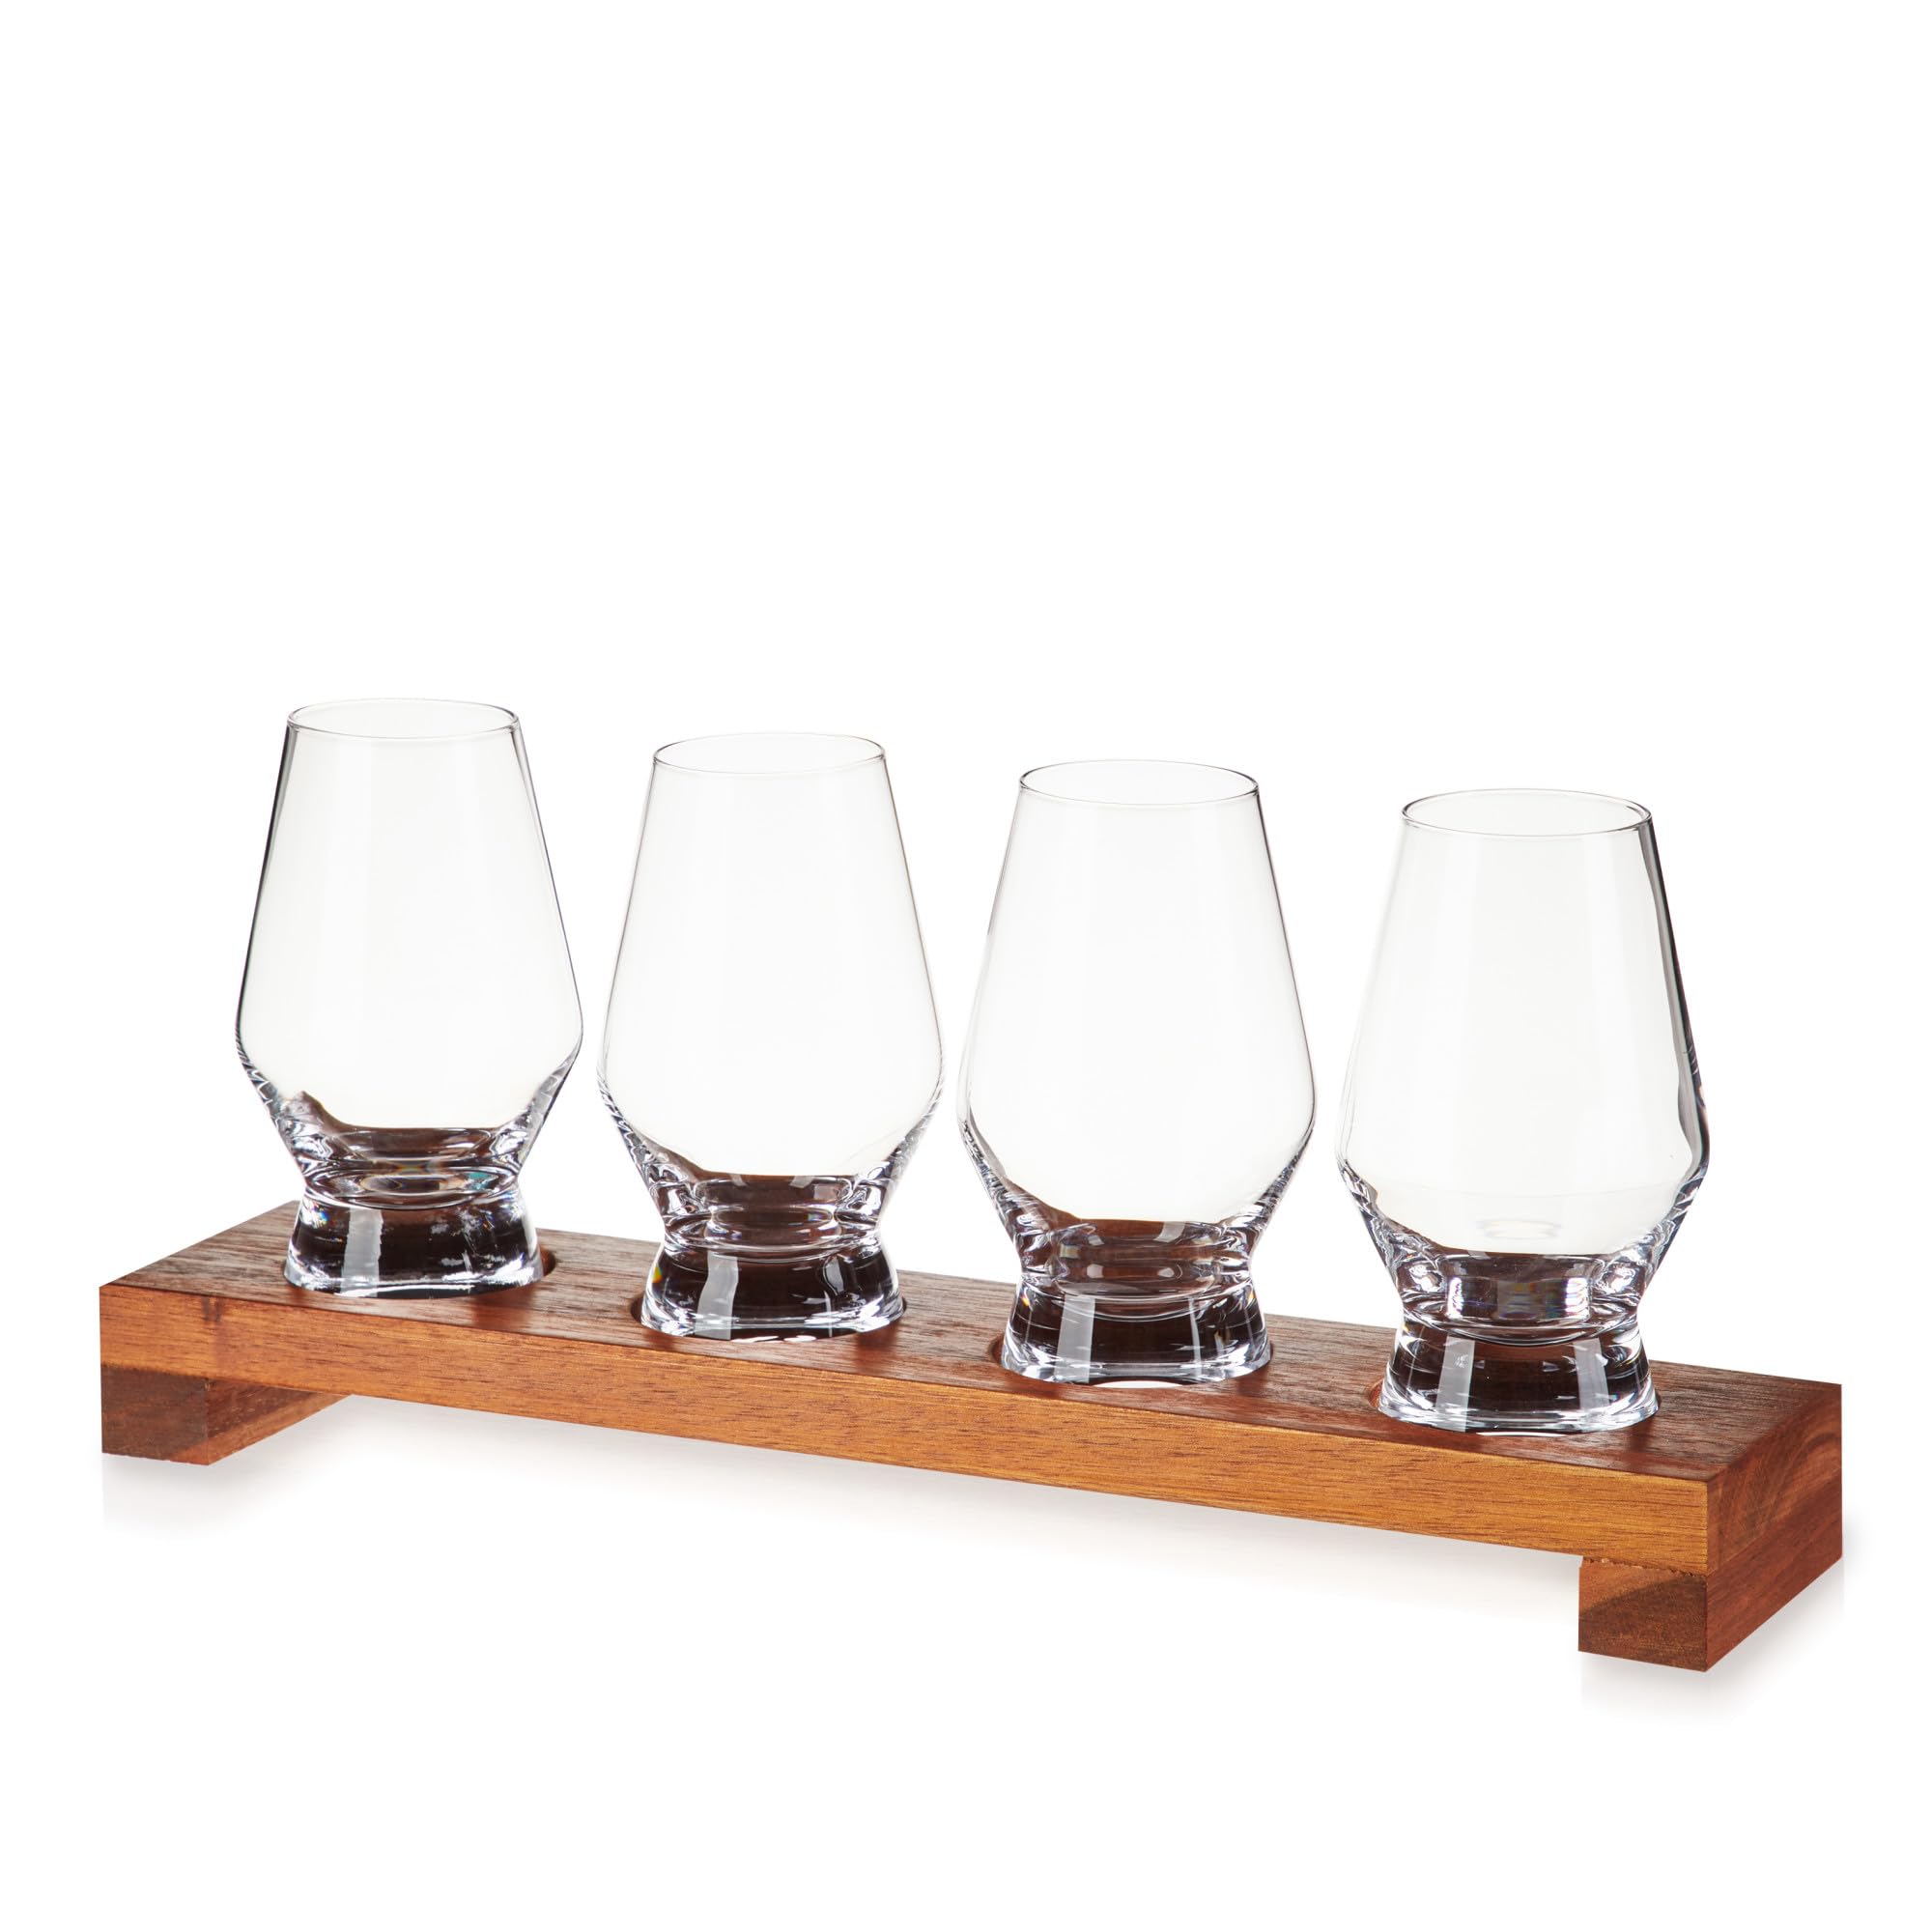 Viski Spirit Tasting Flight Kit, Crystal Liquor Glasses with Wooden Serving Tray for Whiskey, Brandy, Set of 4 8 oz. Footed Scotch Tumblers, 1 Board, Set of 5, Clear